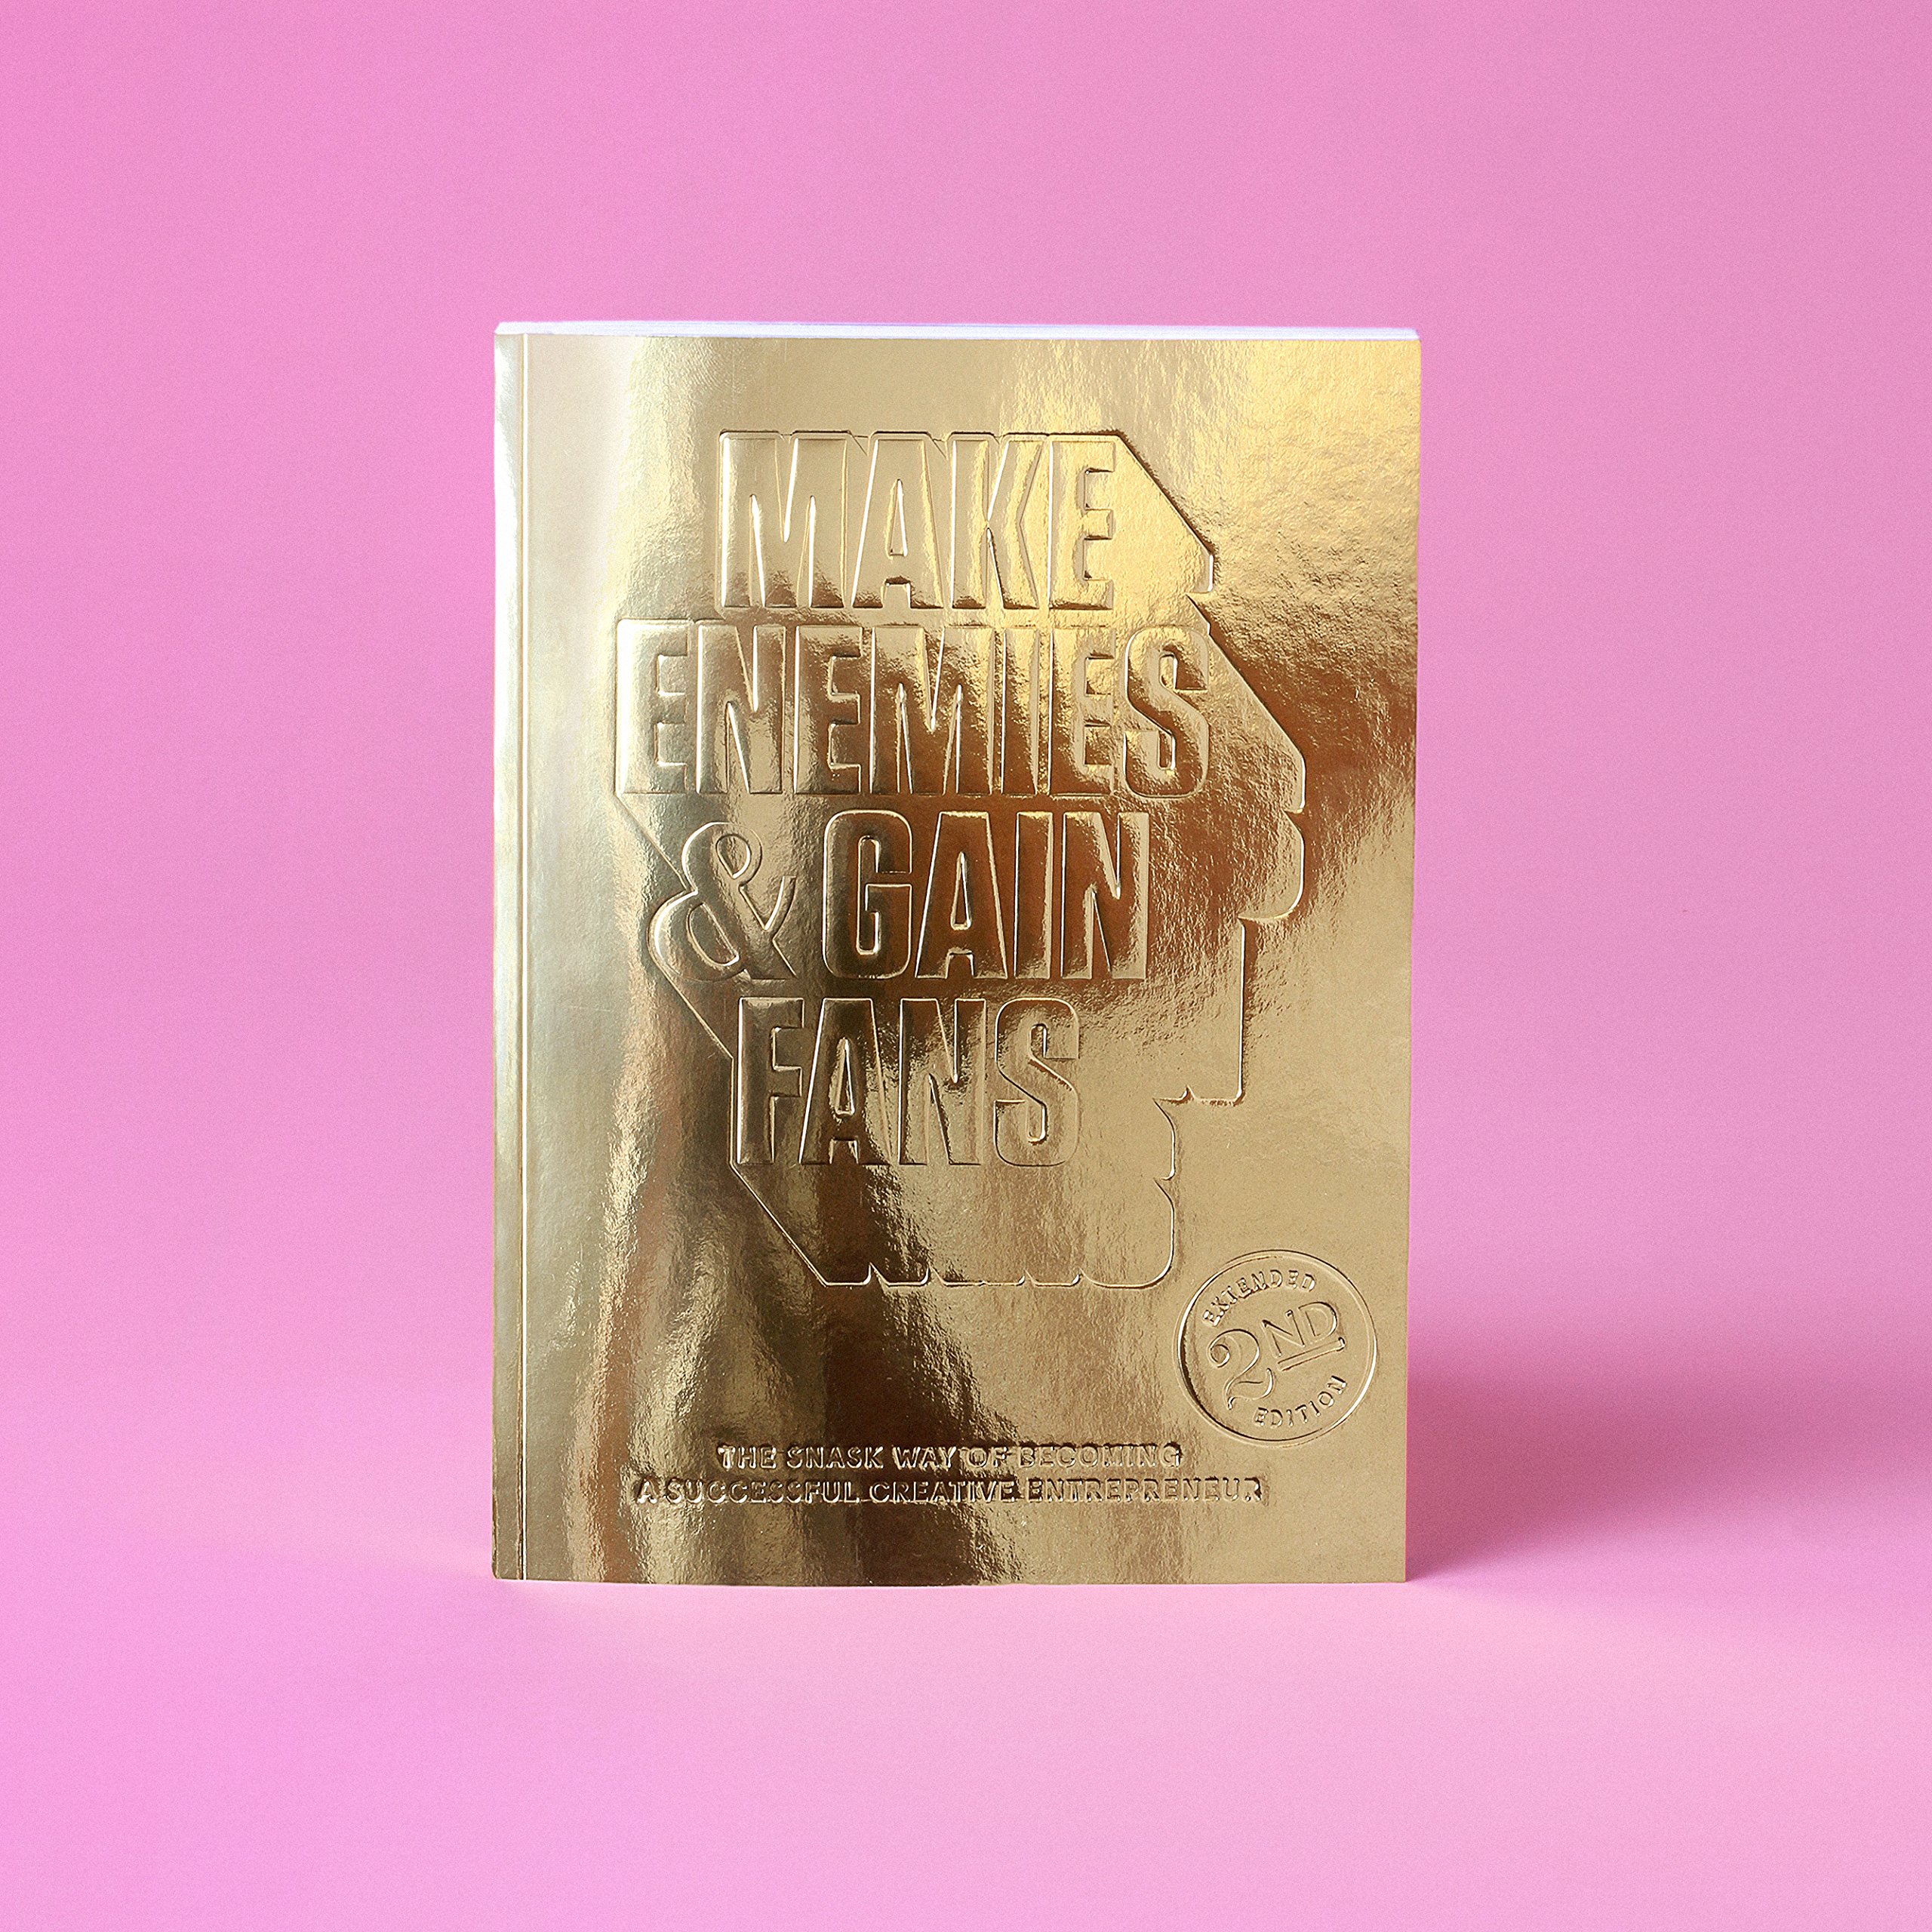 Creative Agency Snask gold book Make Enemies and Gain Fans: The Snask Way of Becoming a Successful Creative Entrepreneur